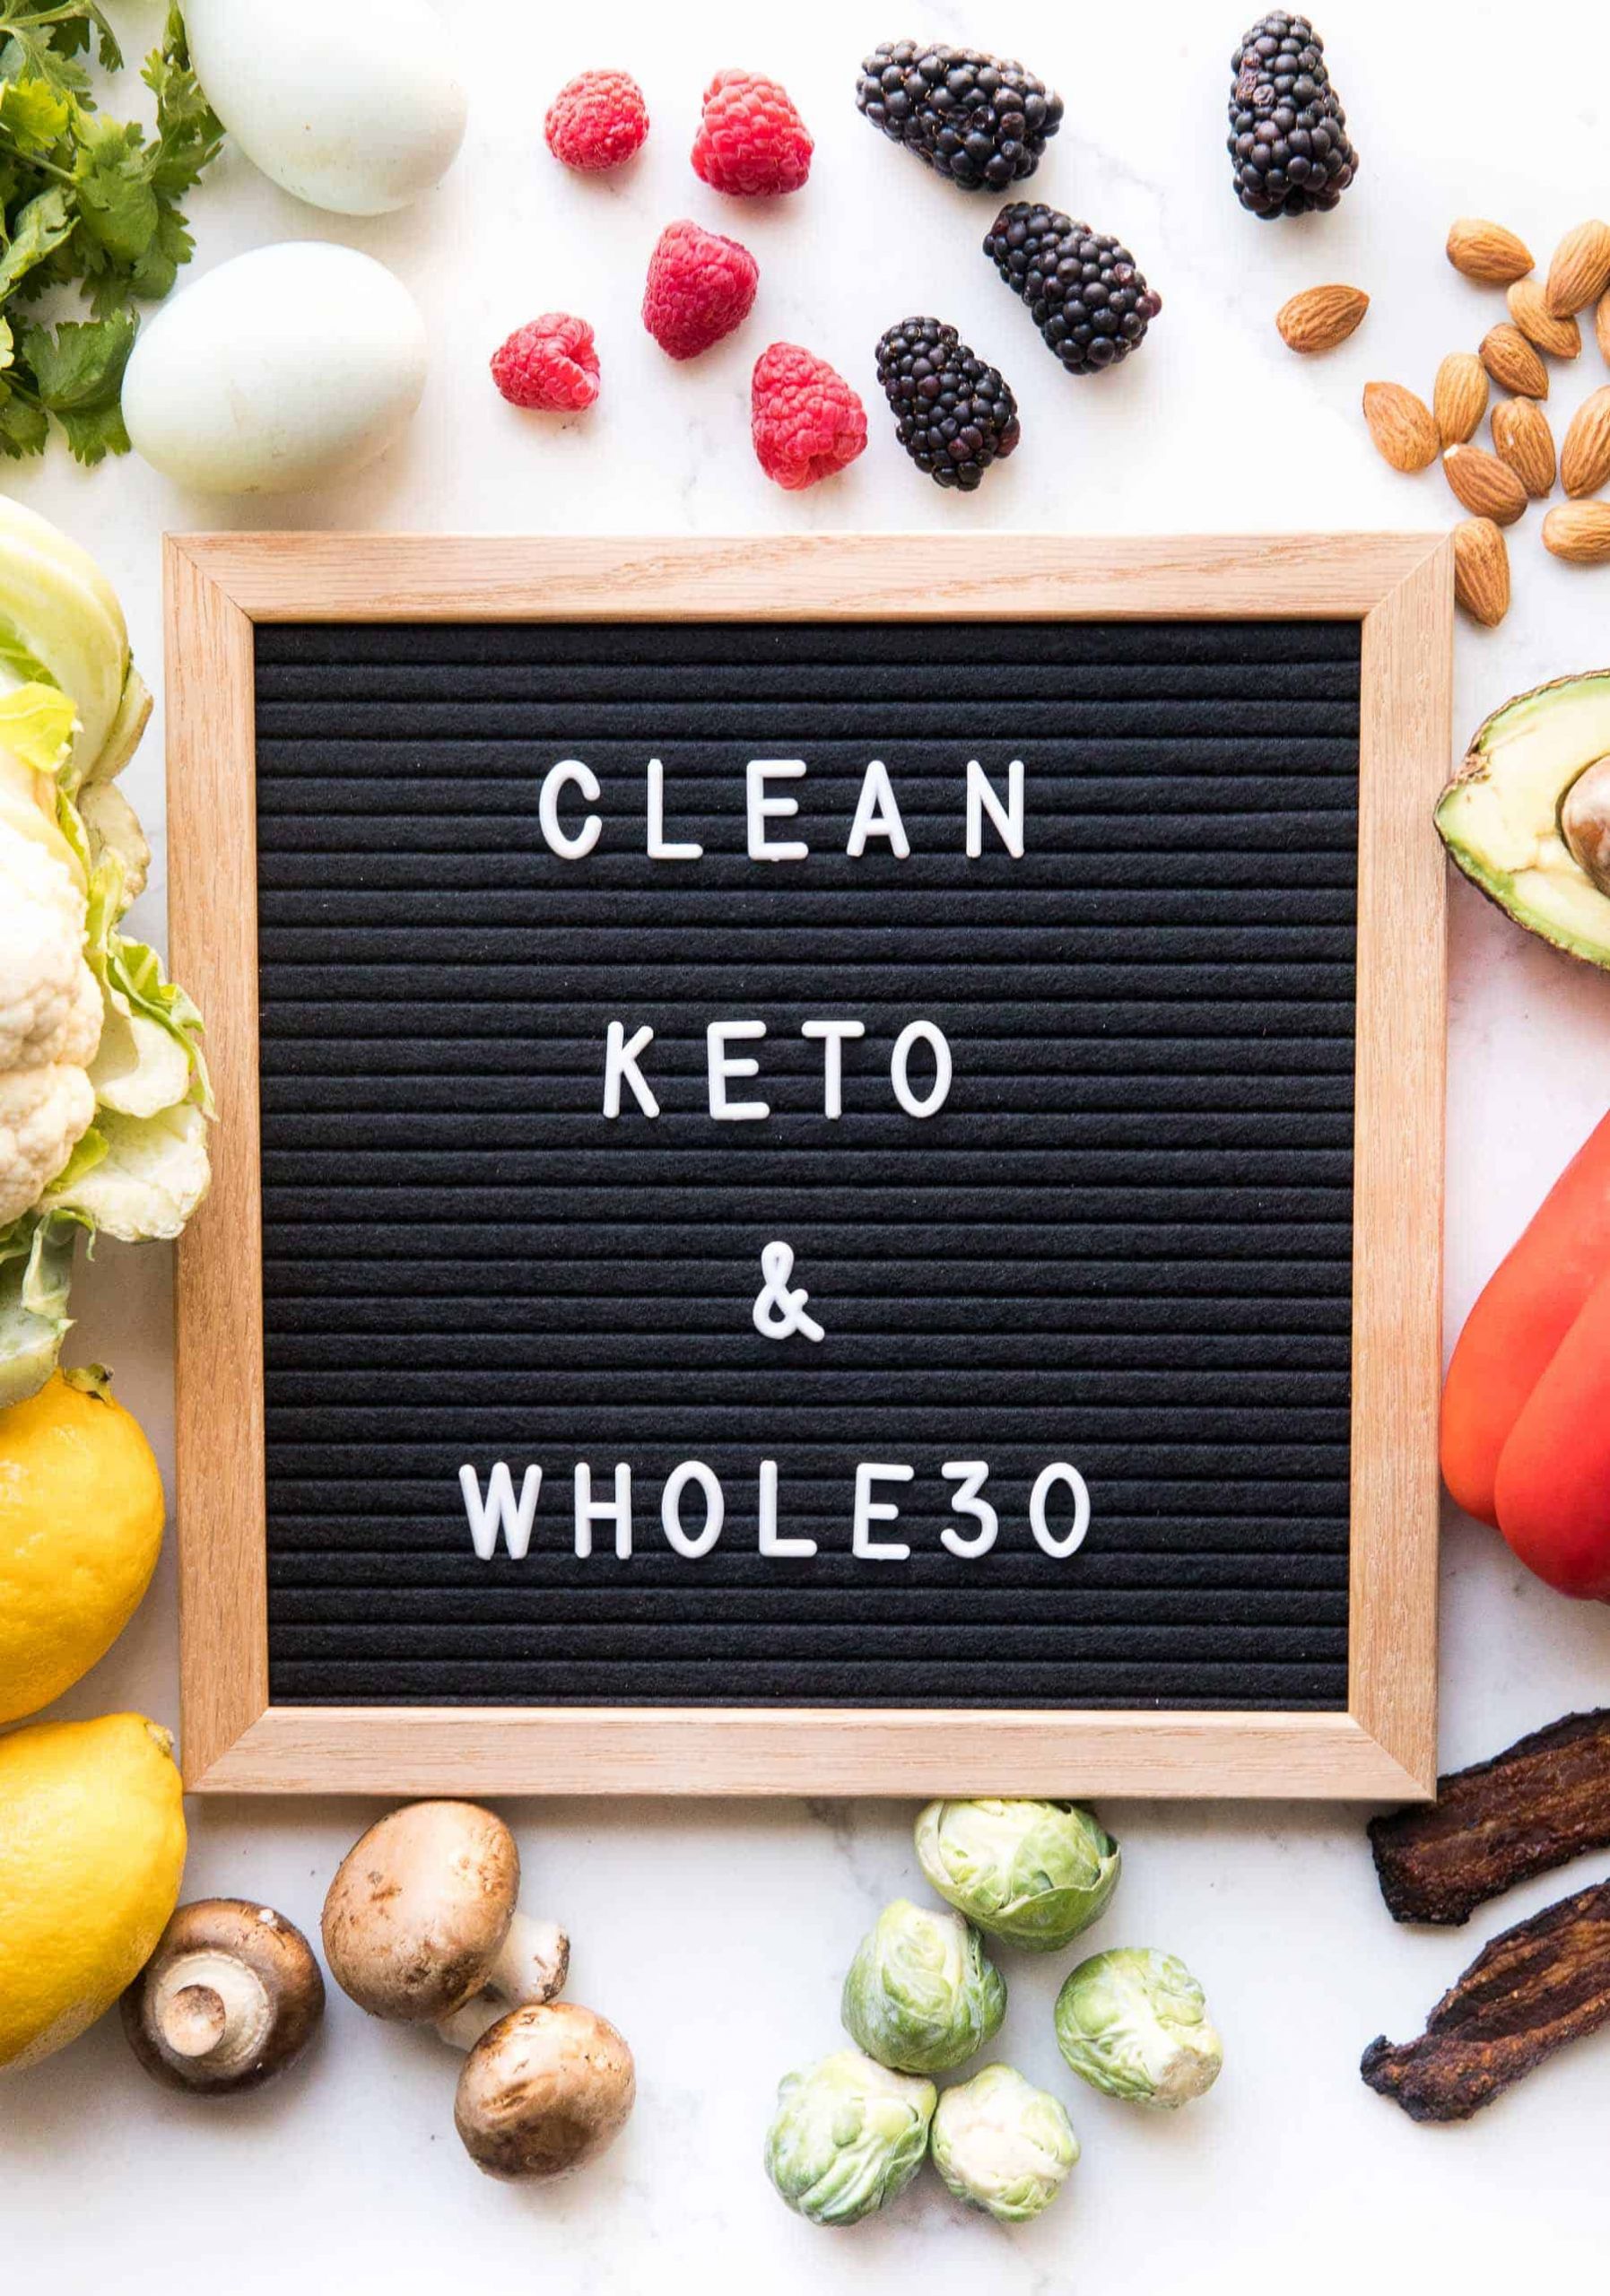 Clean Keto Foods
 The Clean Keto Whole30 Foods I Eat Tastes Lovely